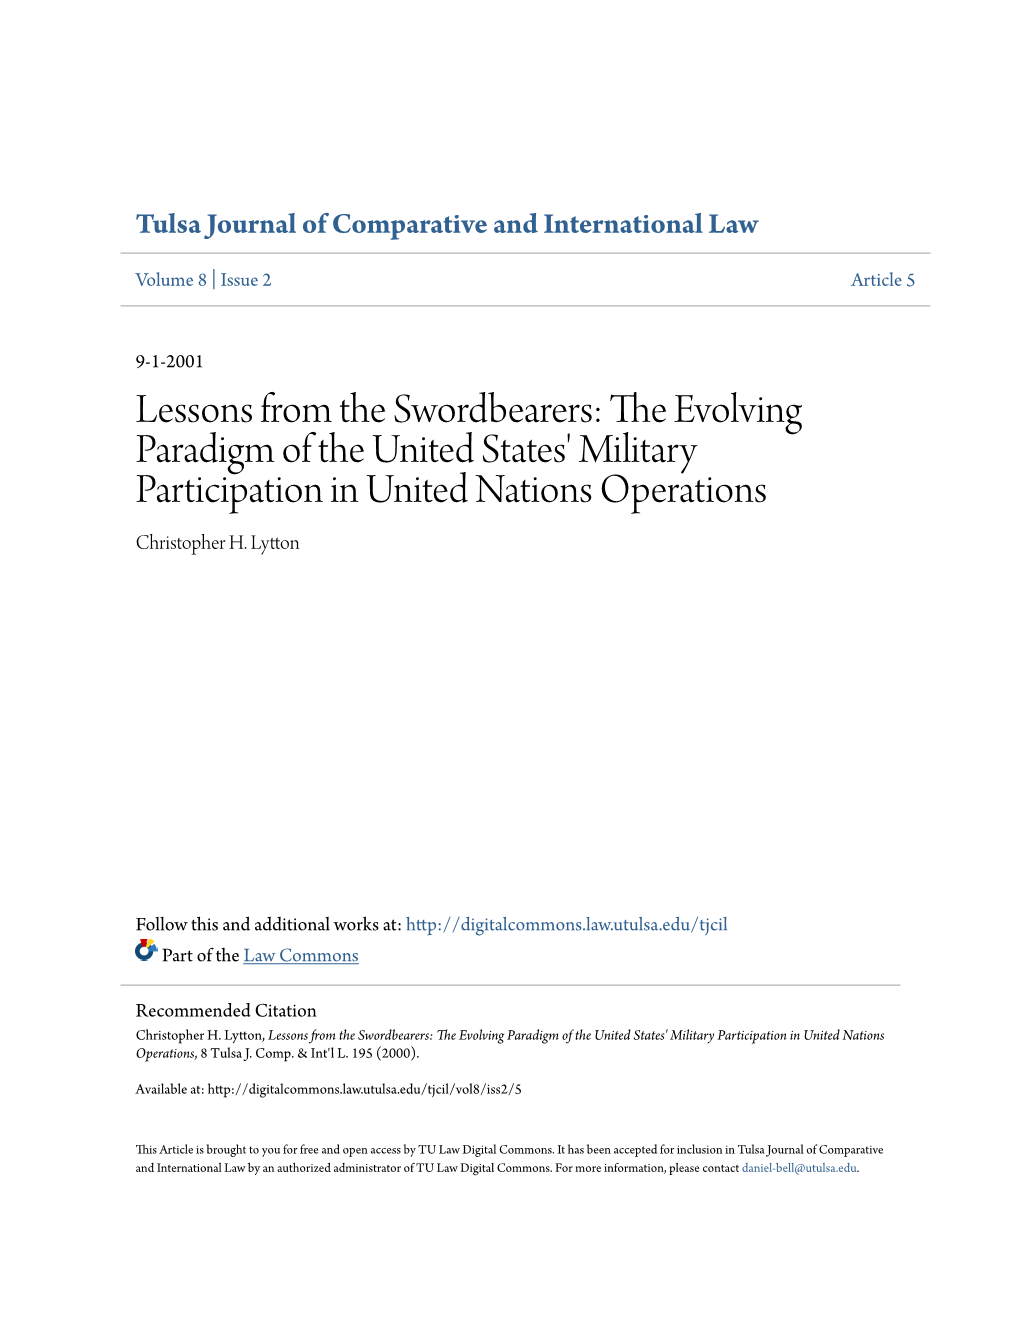 The Evolving Paradigm of the United States' Military Participation in United Nations Operations, 8 Tulsa J